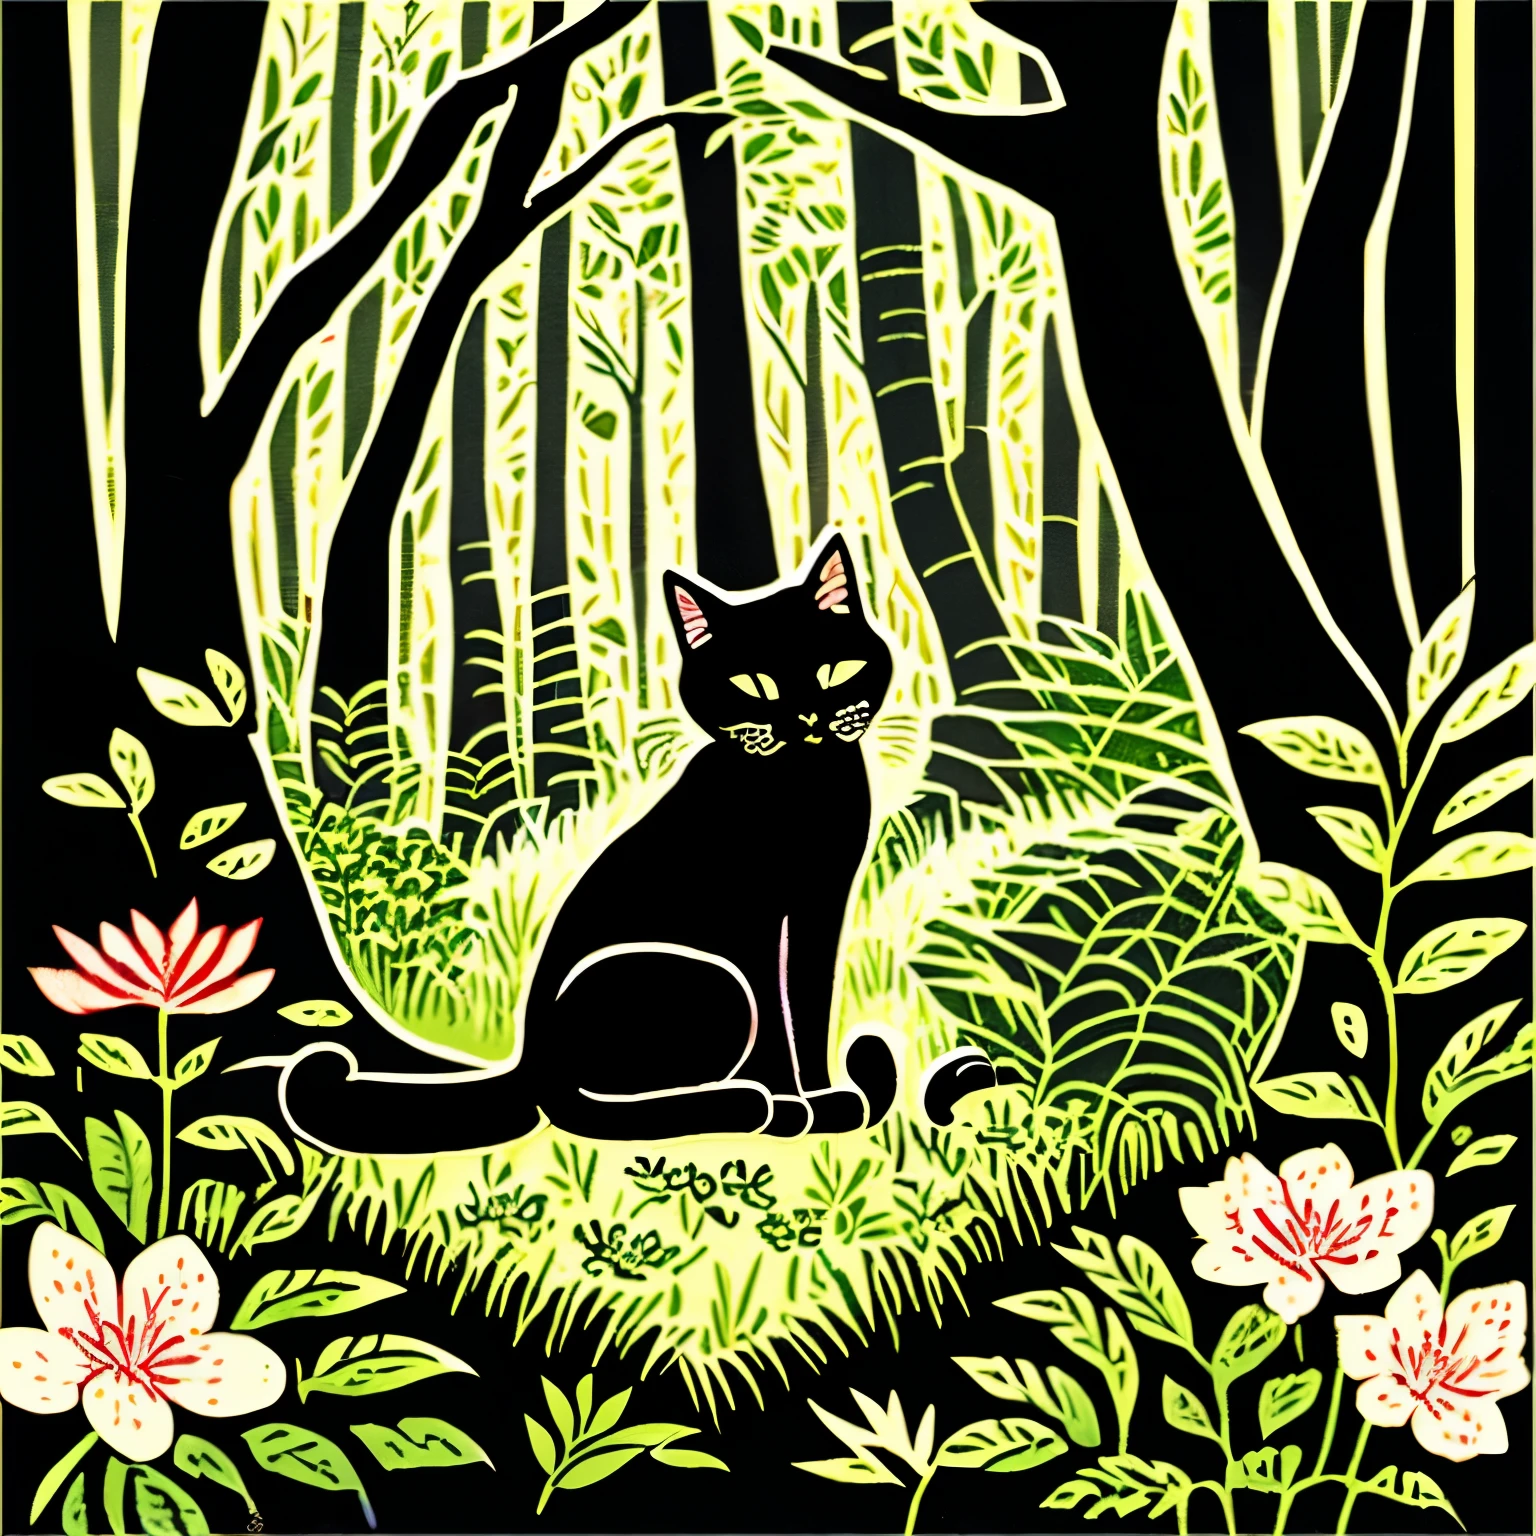 there is a black cat that is sitting in the bushes, cat in the forest, by André Beauneveu, by Ni Tian, beautiful illustration, by Yang J, jen bartel, by Eizan Kikukawa, 🌺 cgsociety, by Zofia Stryjenska, by Ni Duan, by Andrée Ruellan, by Jean Hélion